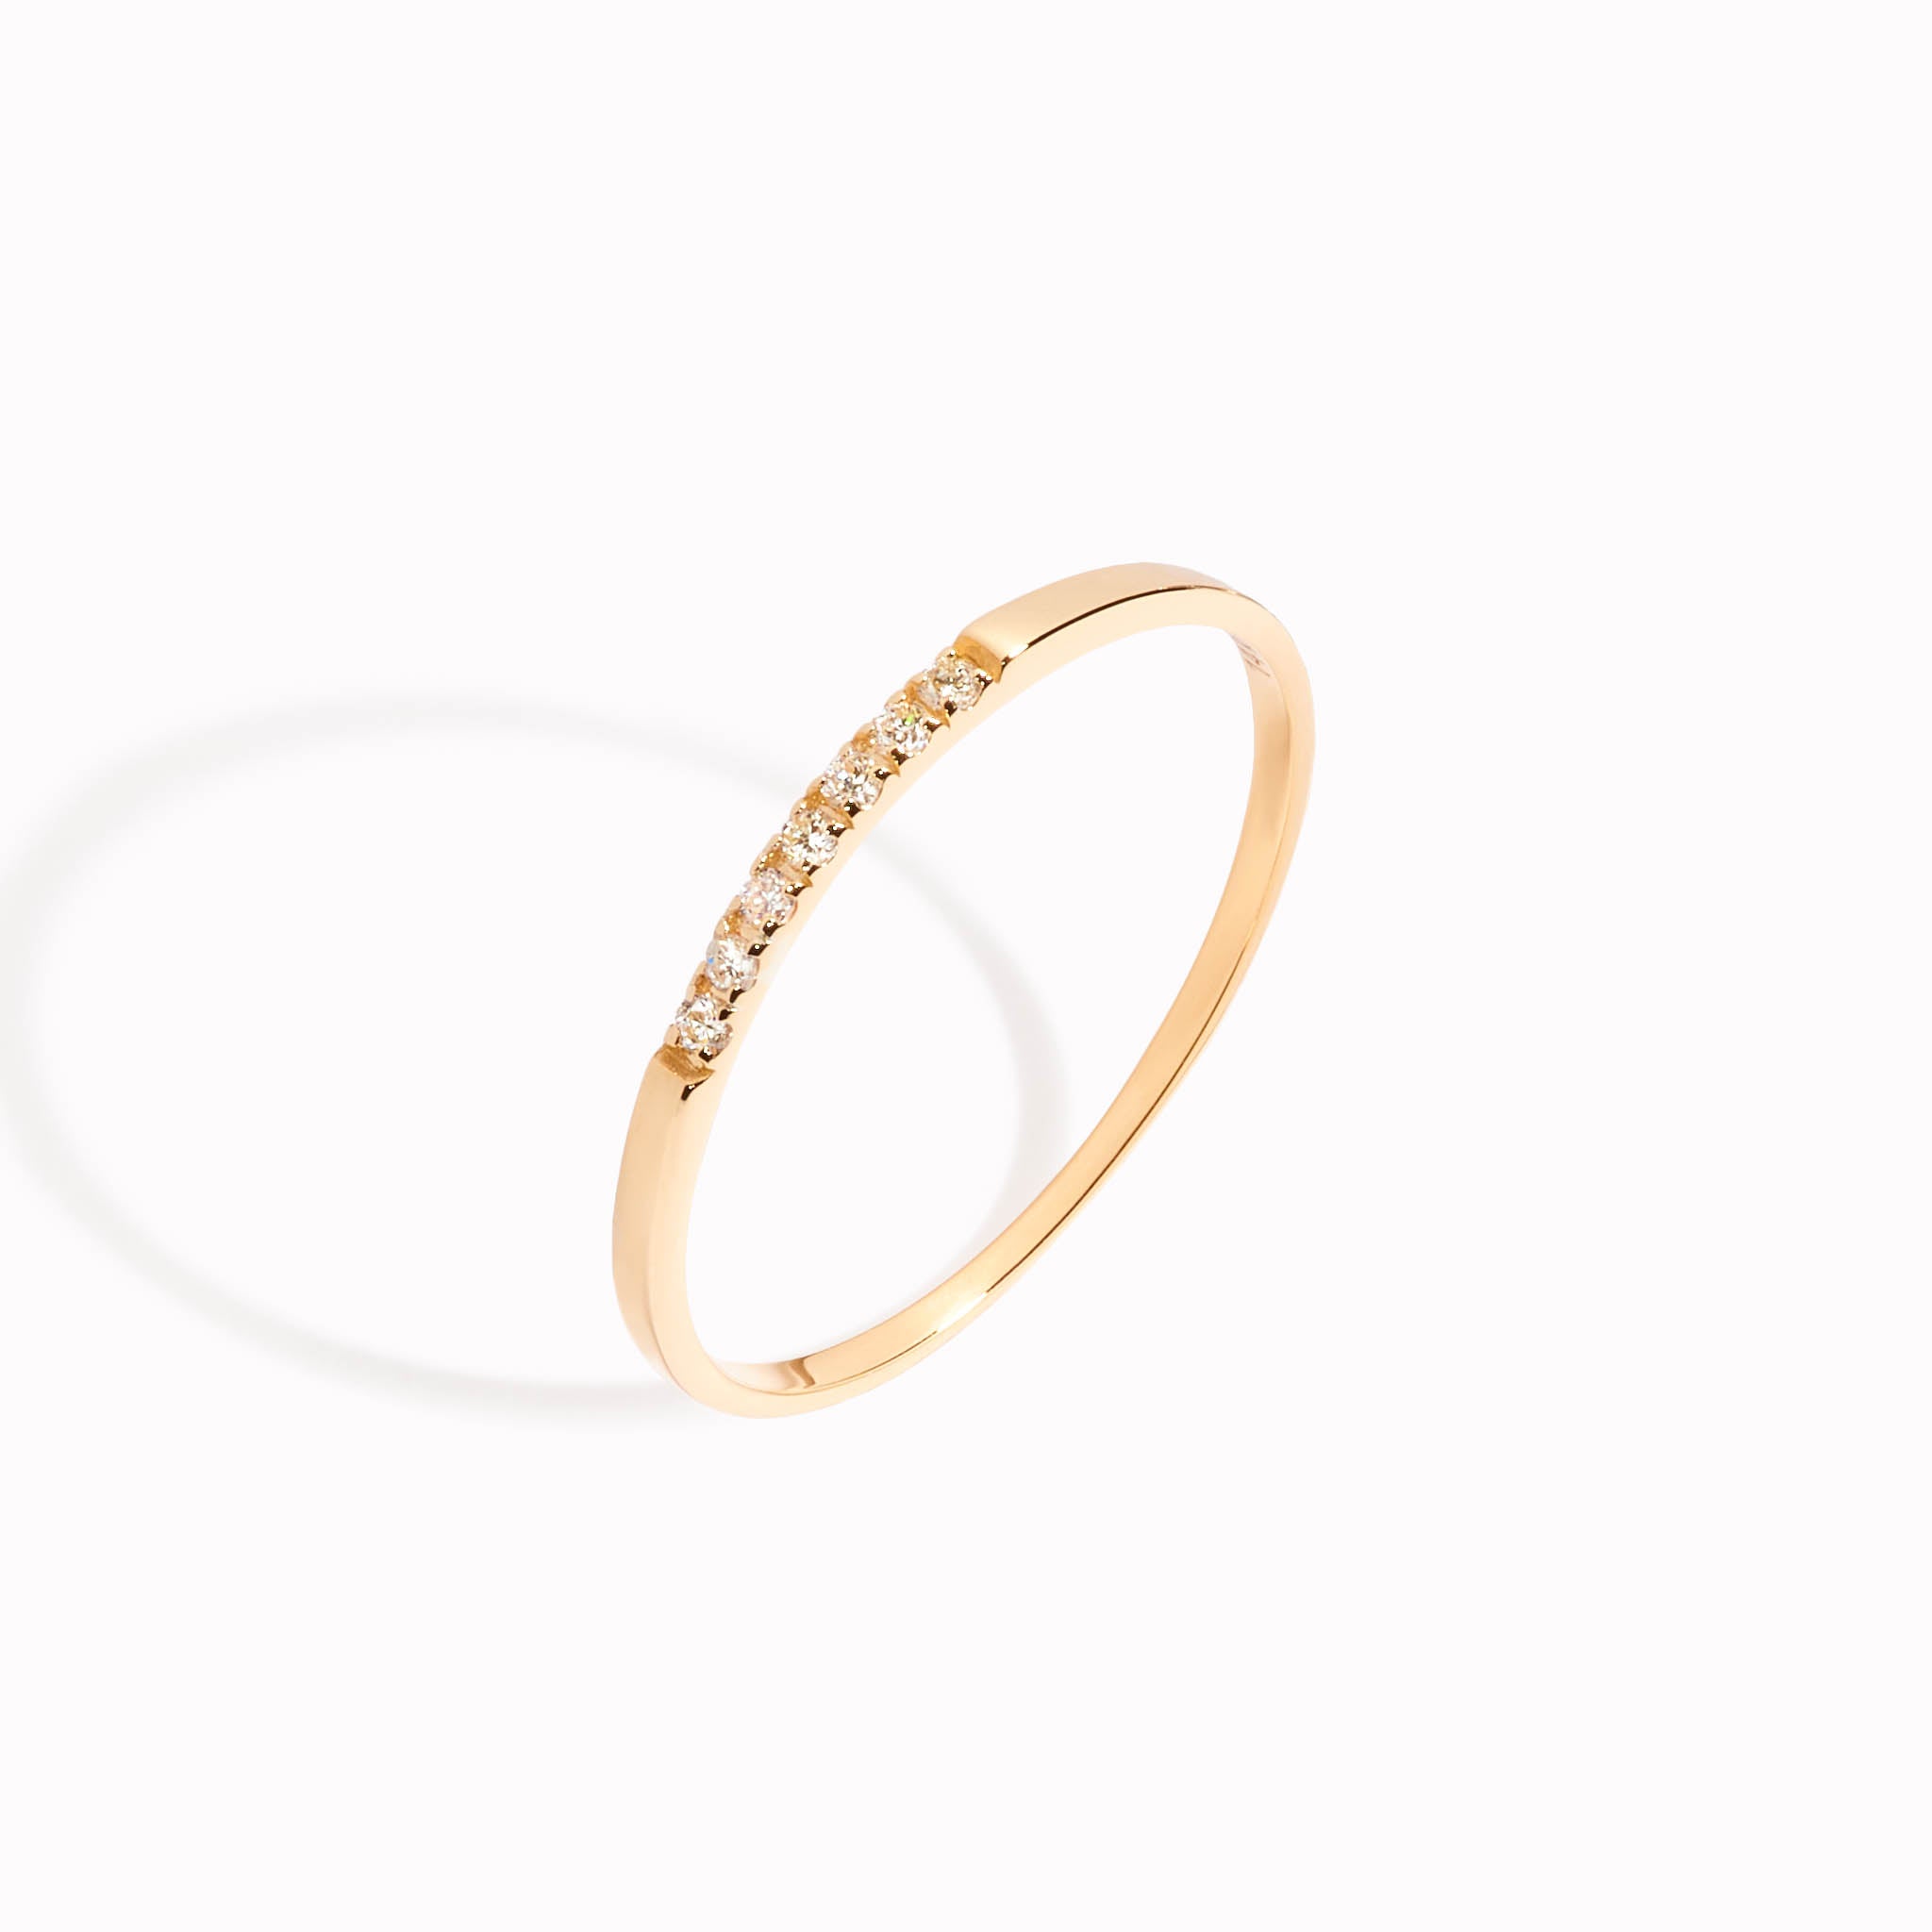 Shop 14k Gold Jewelry for Women | Linjer